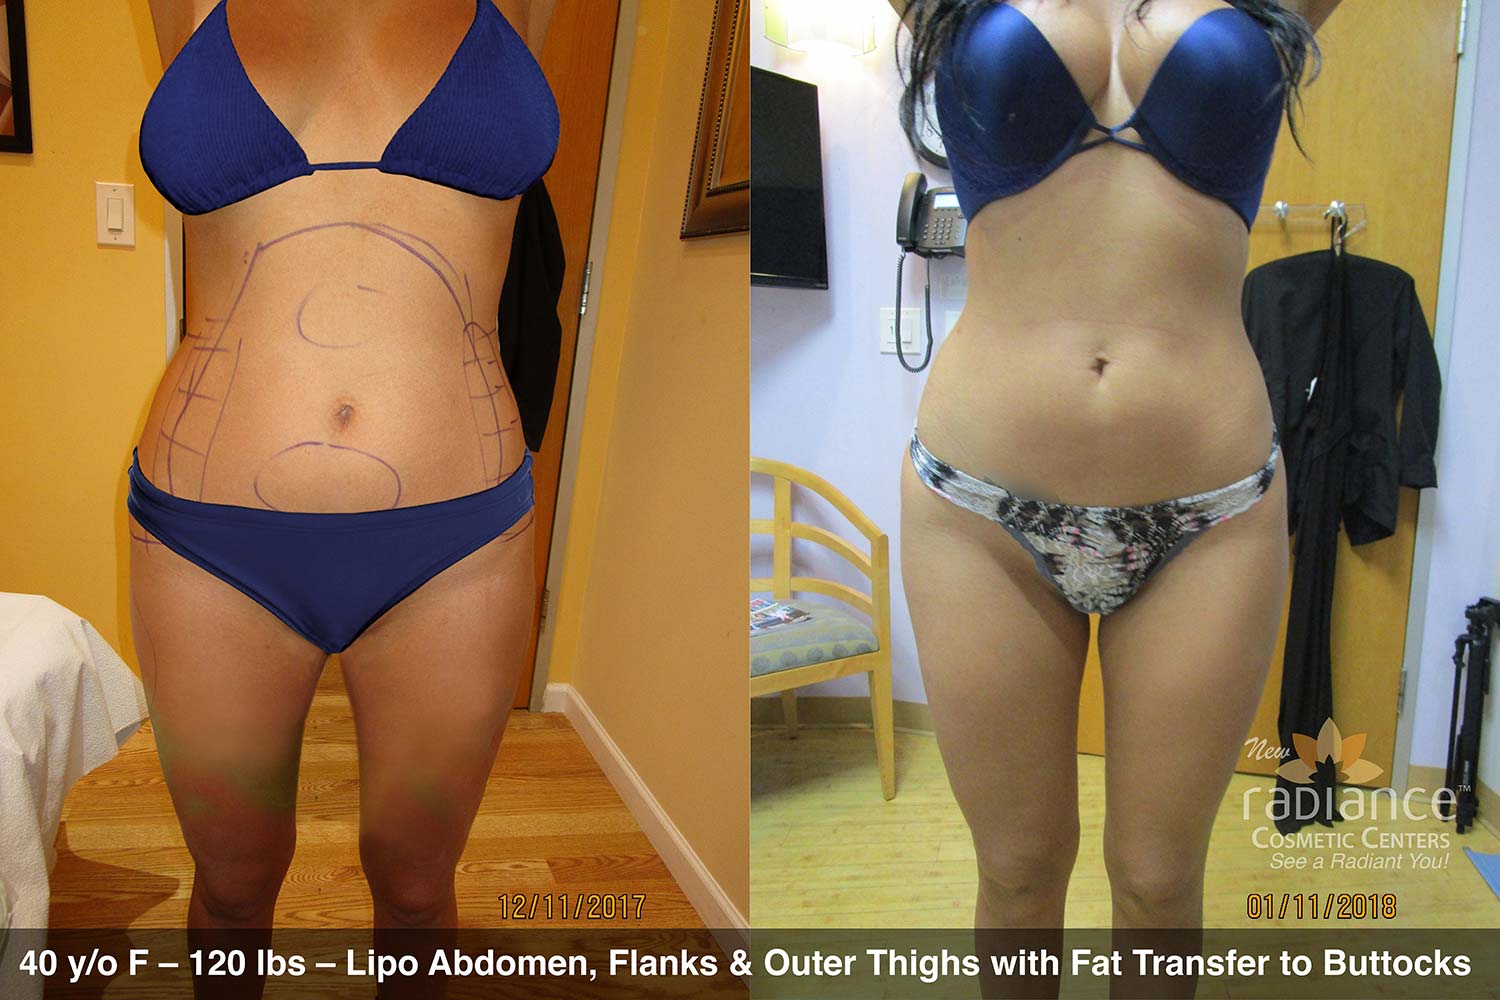 Smart Lipo - Before and After